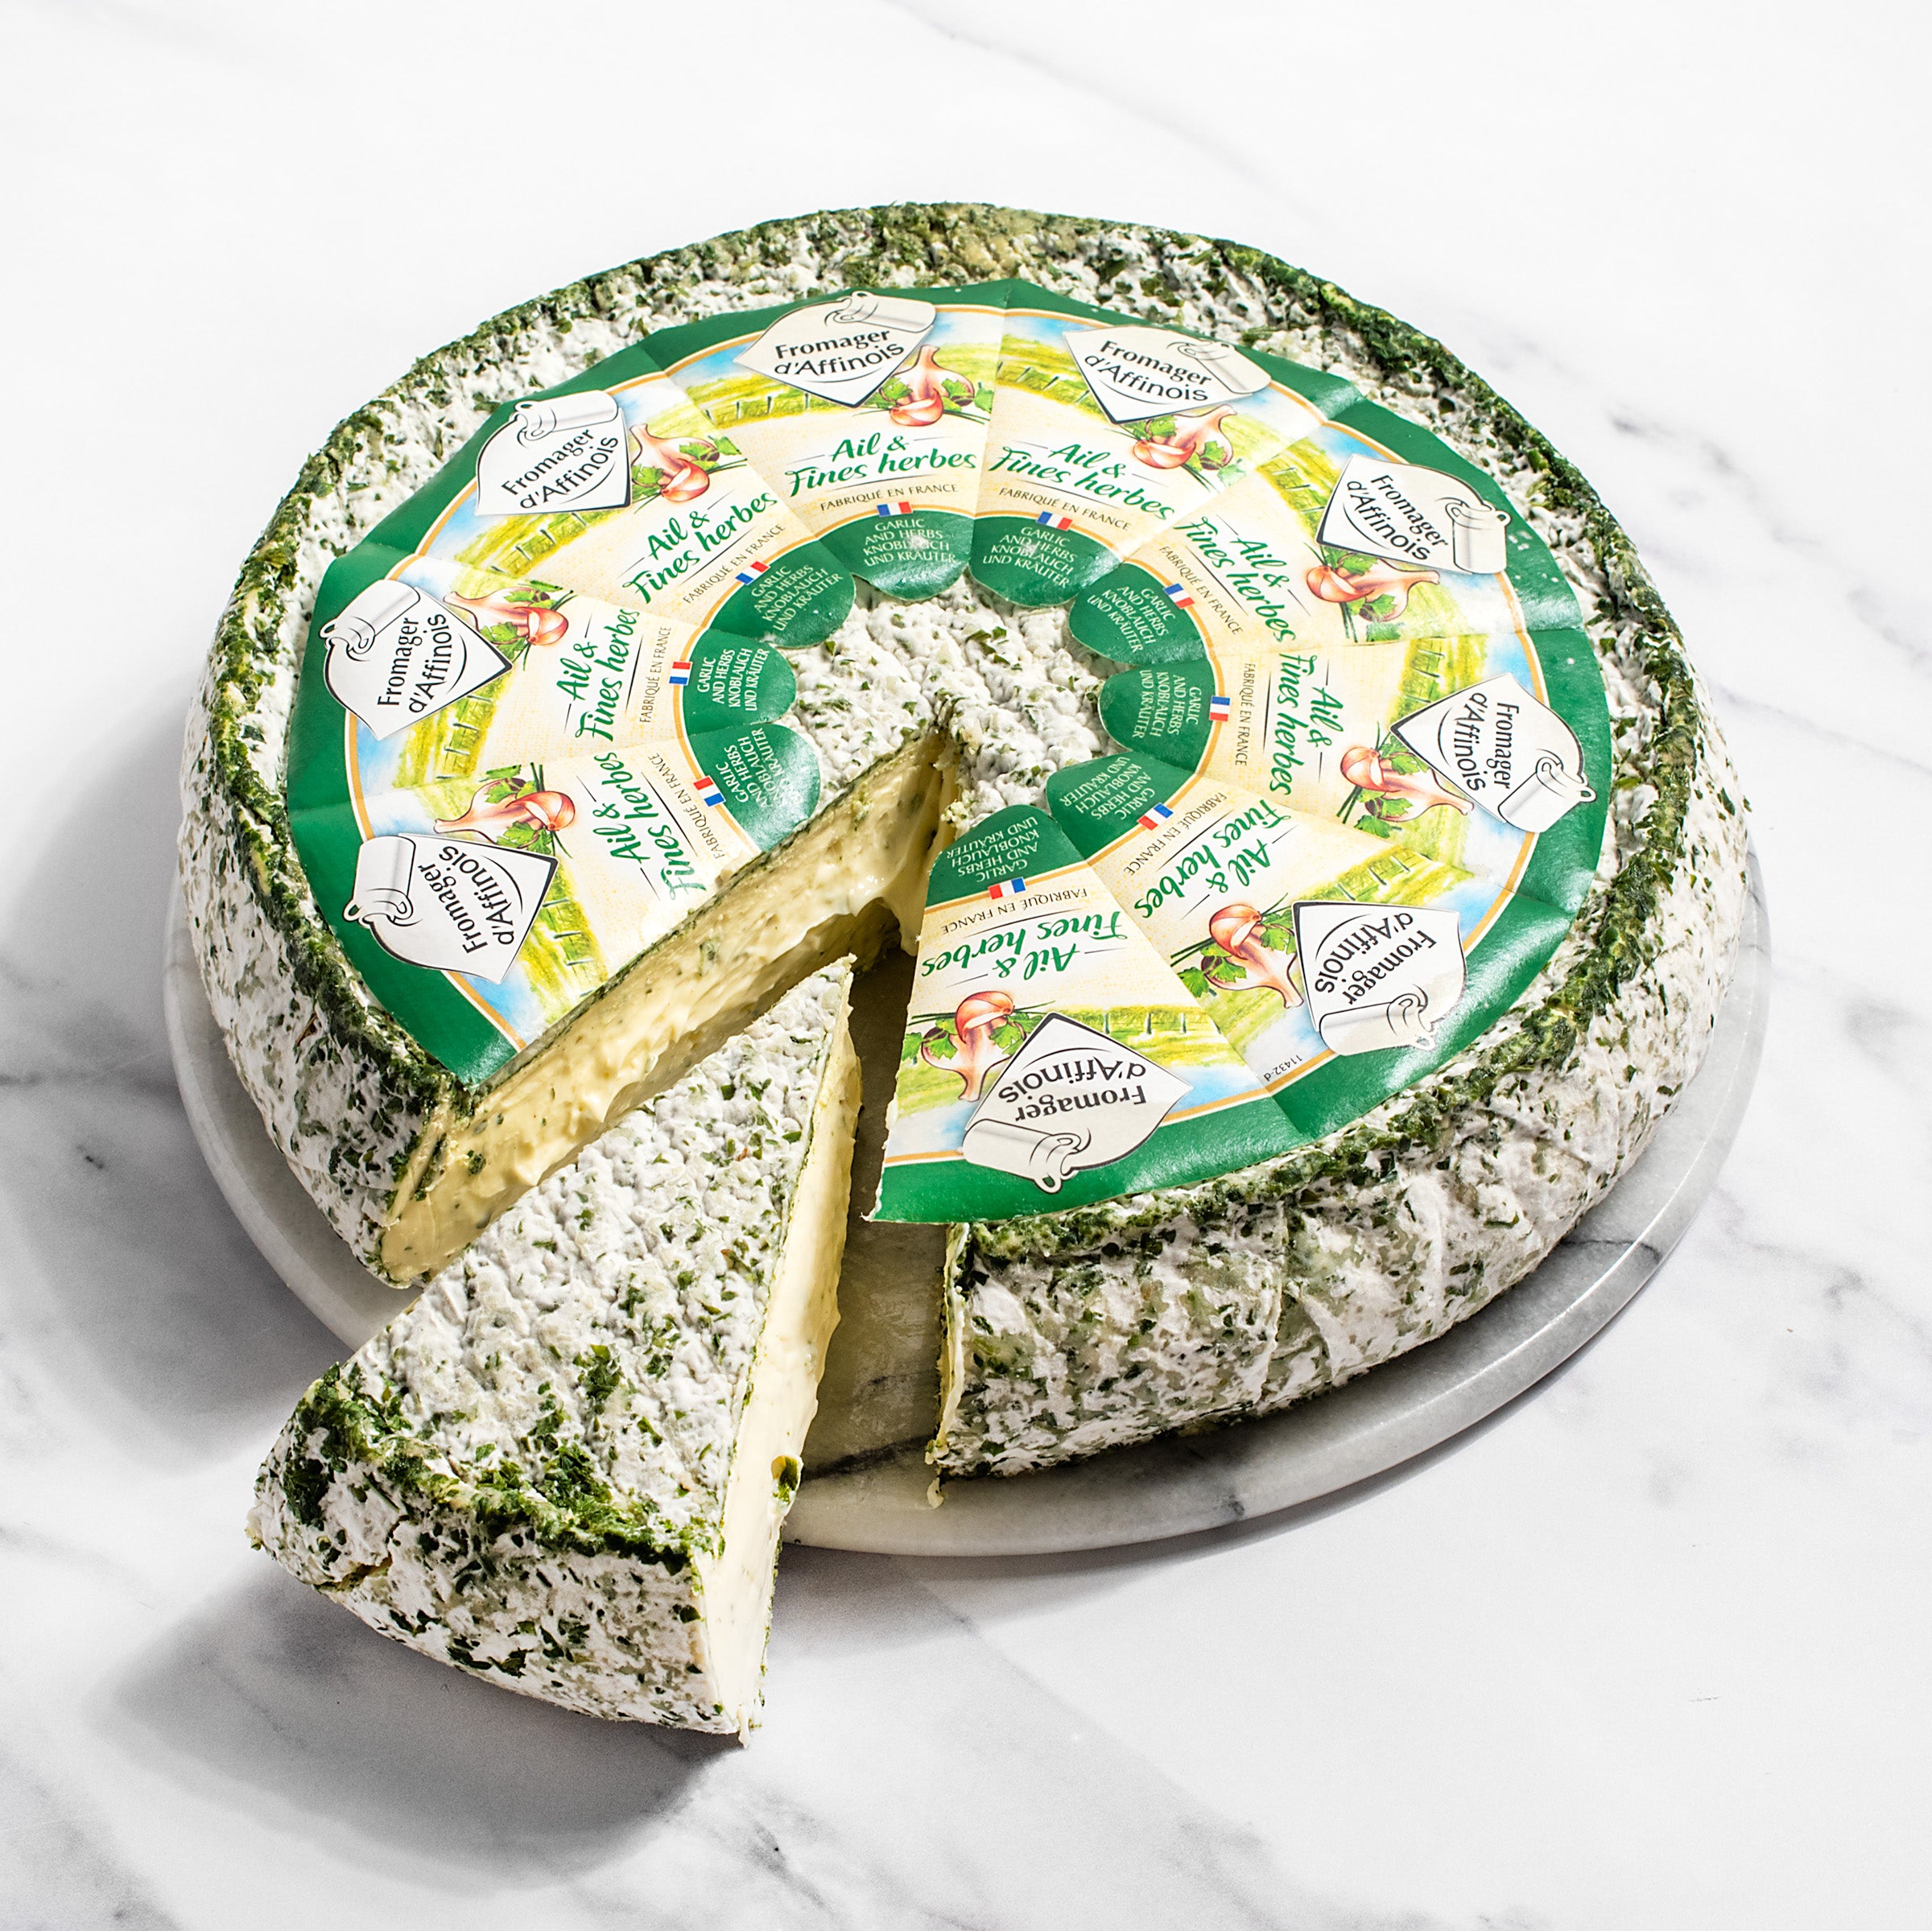 Fromager d'Affinois with Garlic & Herb Cheese/Fromagerie Guilloteau/Cheese  – igourmet